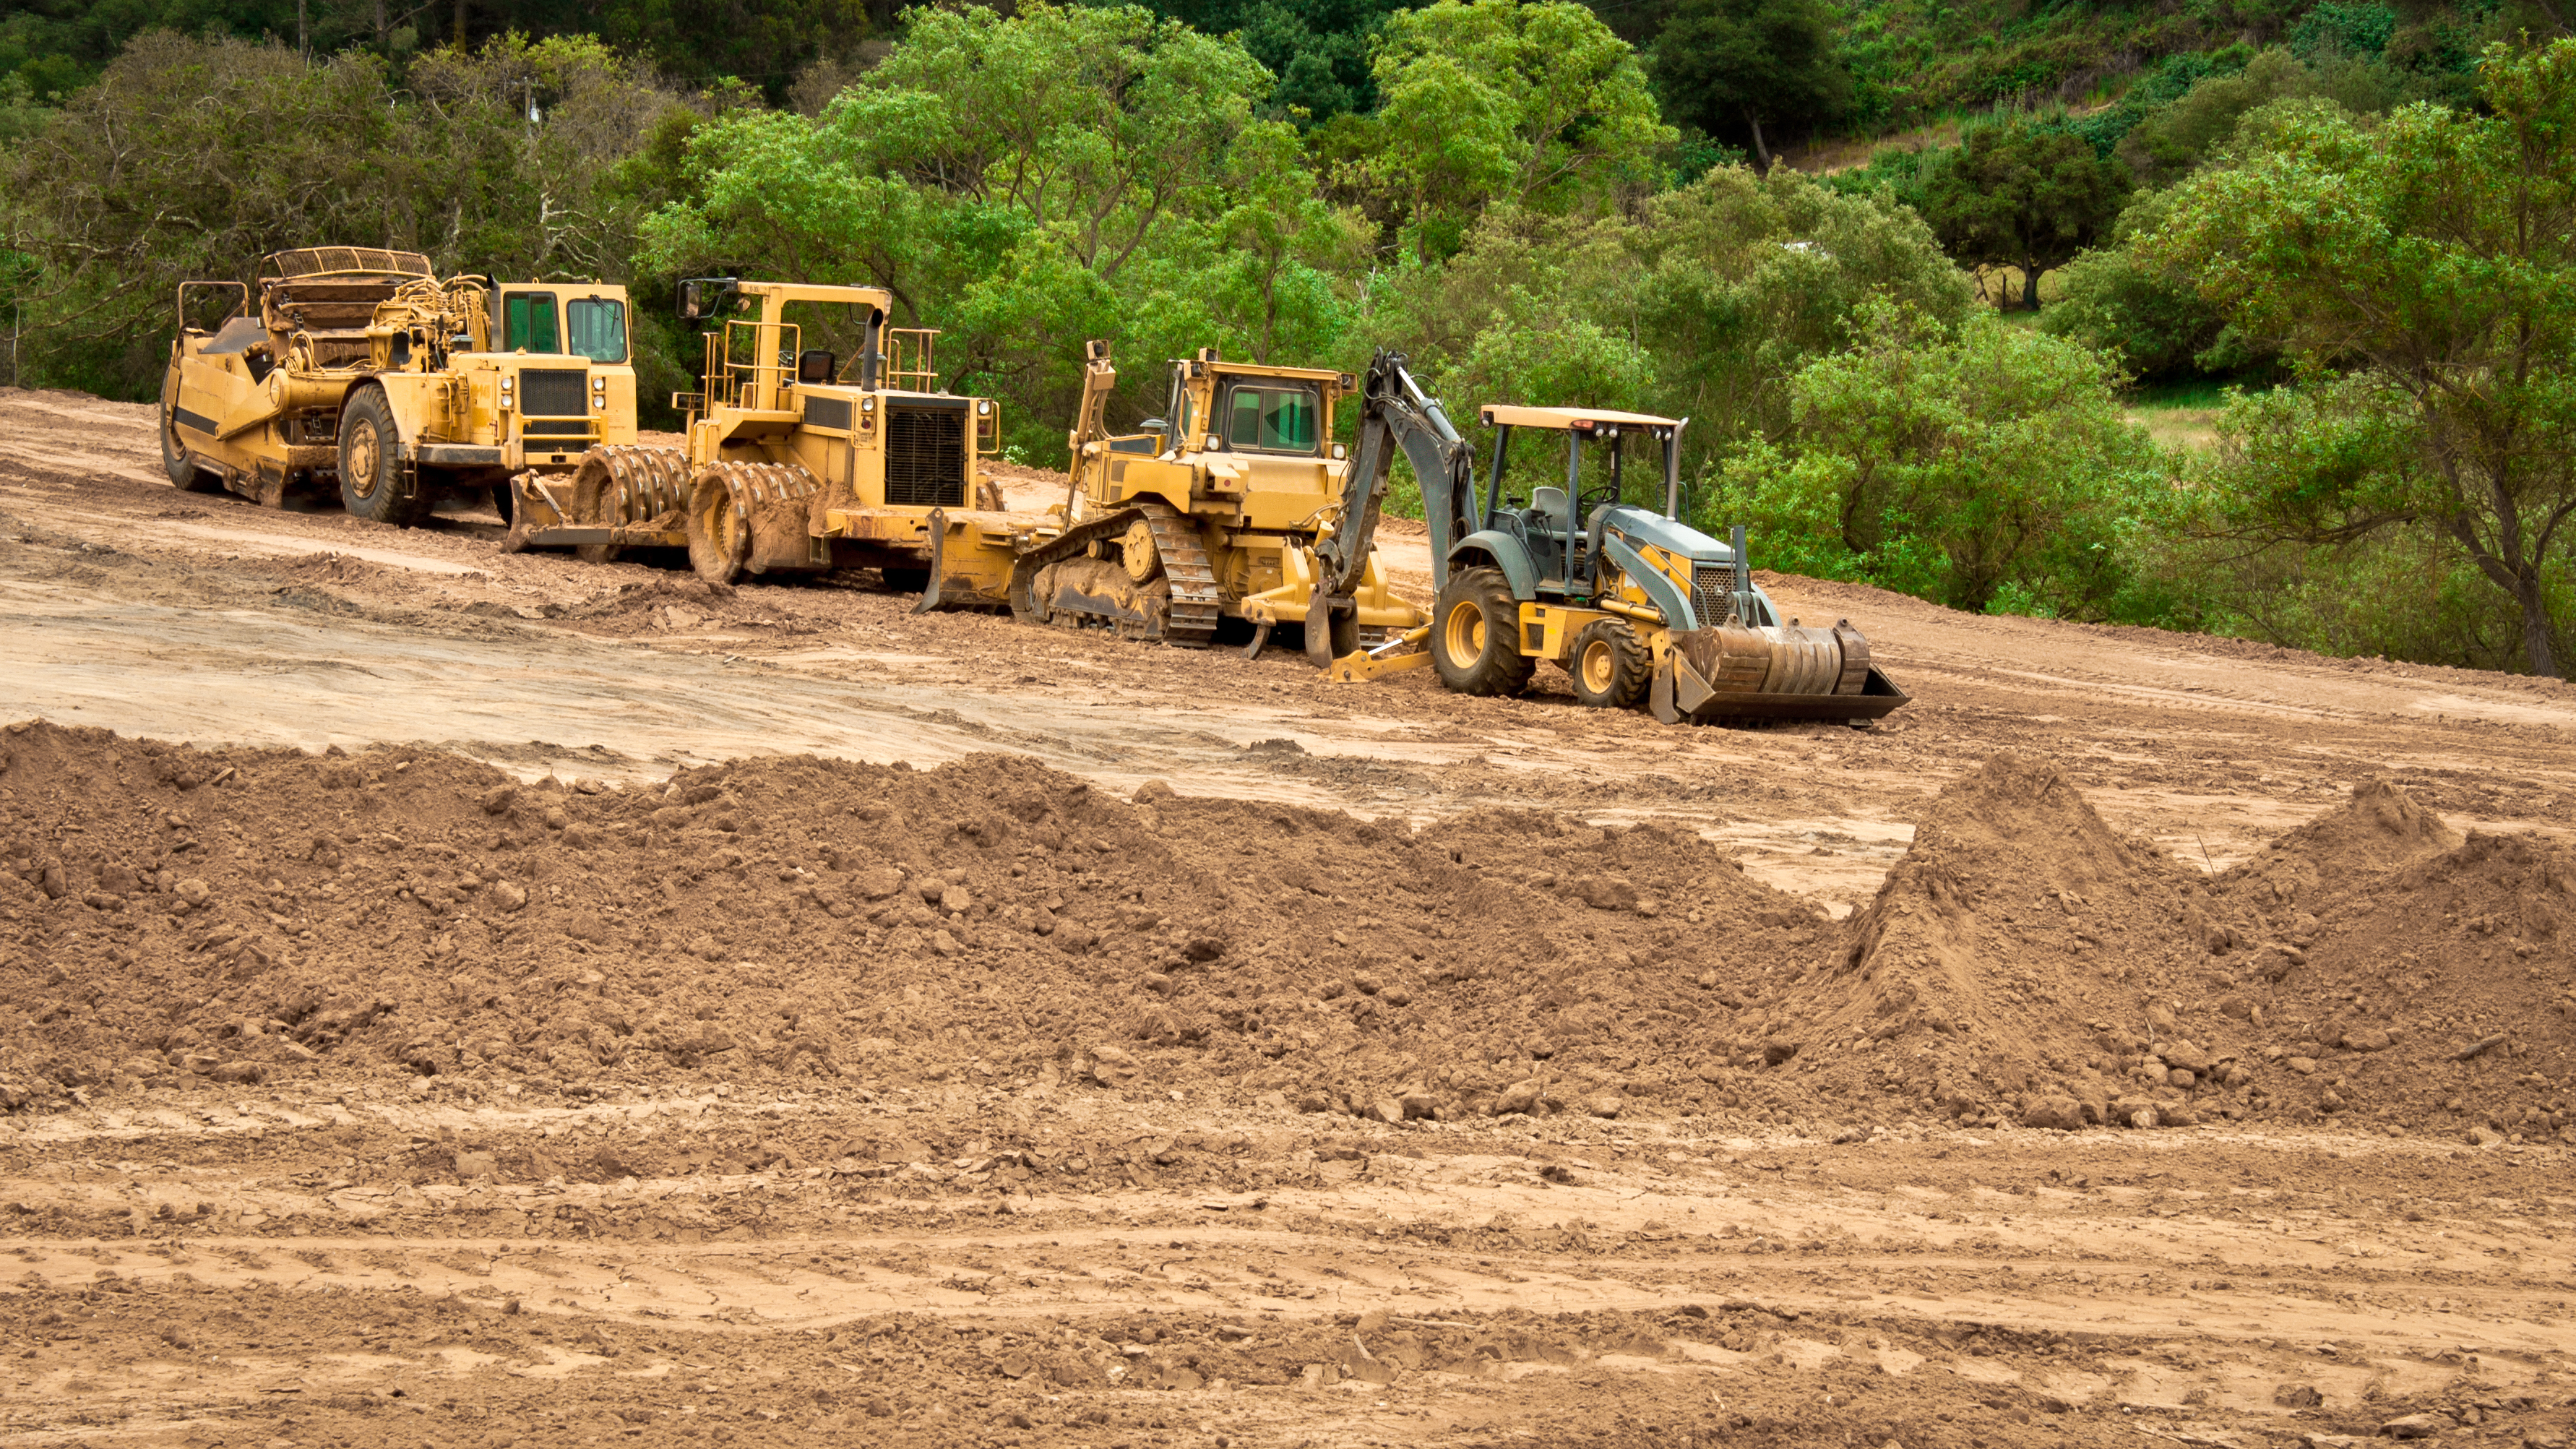 Earthwork Site and Equipment